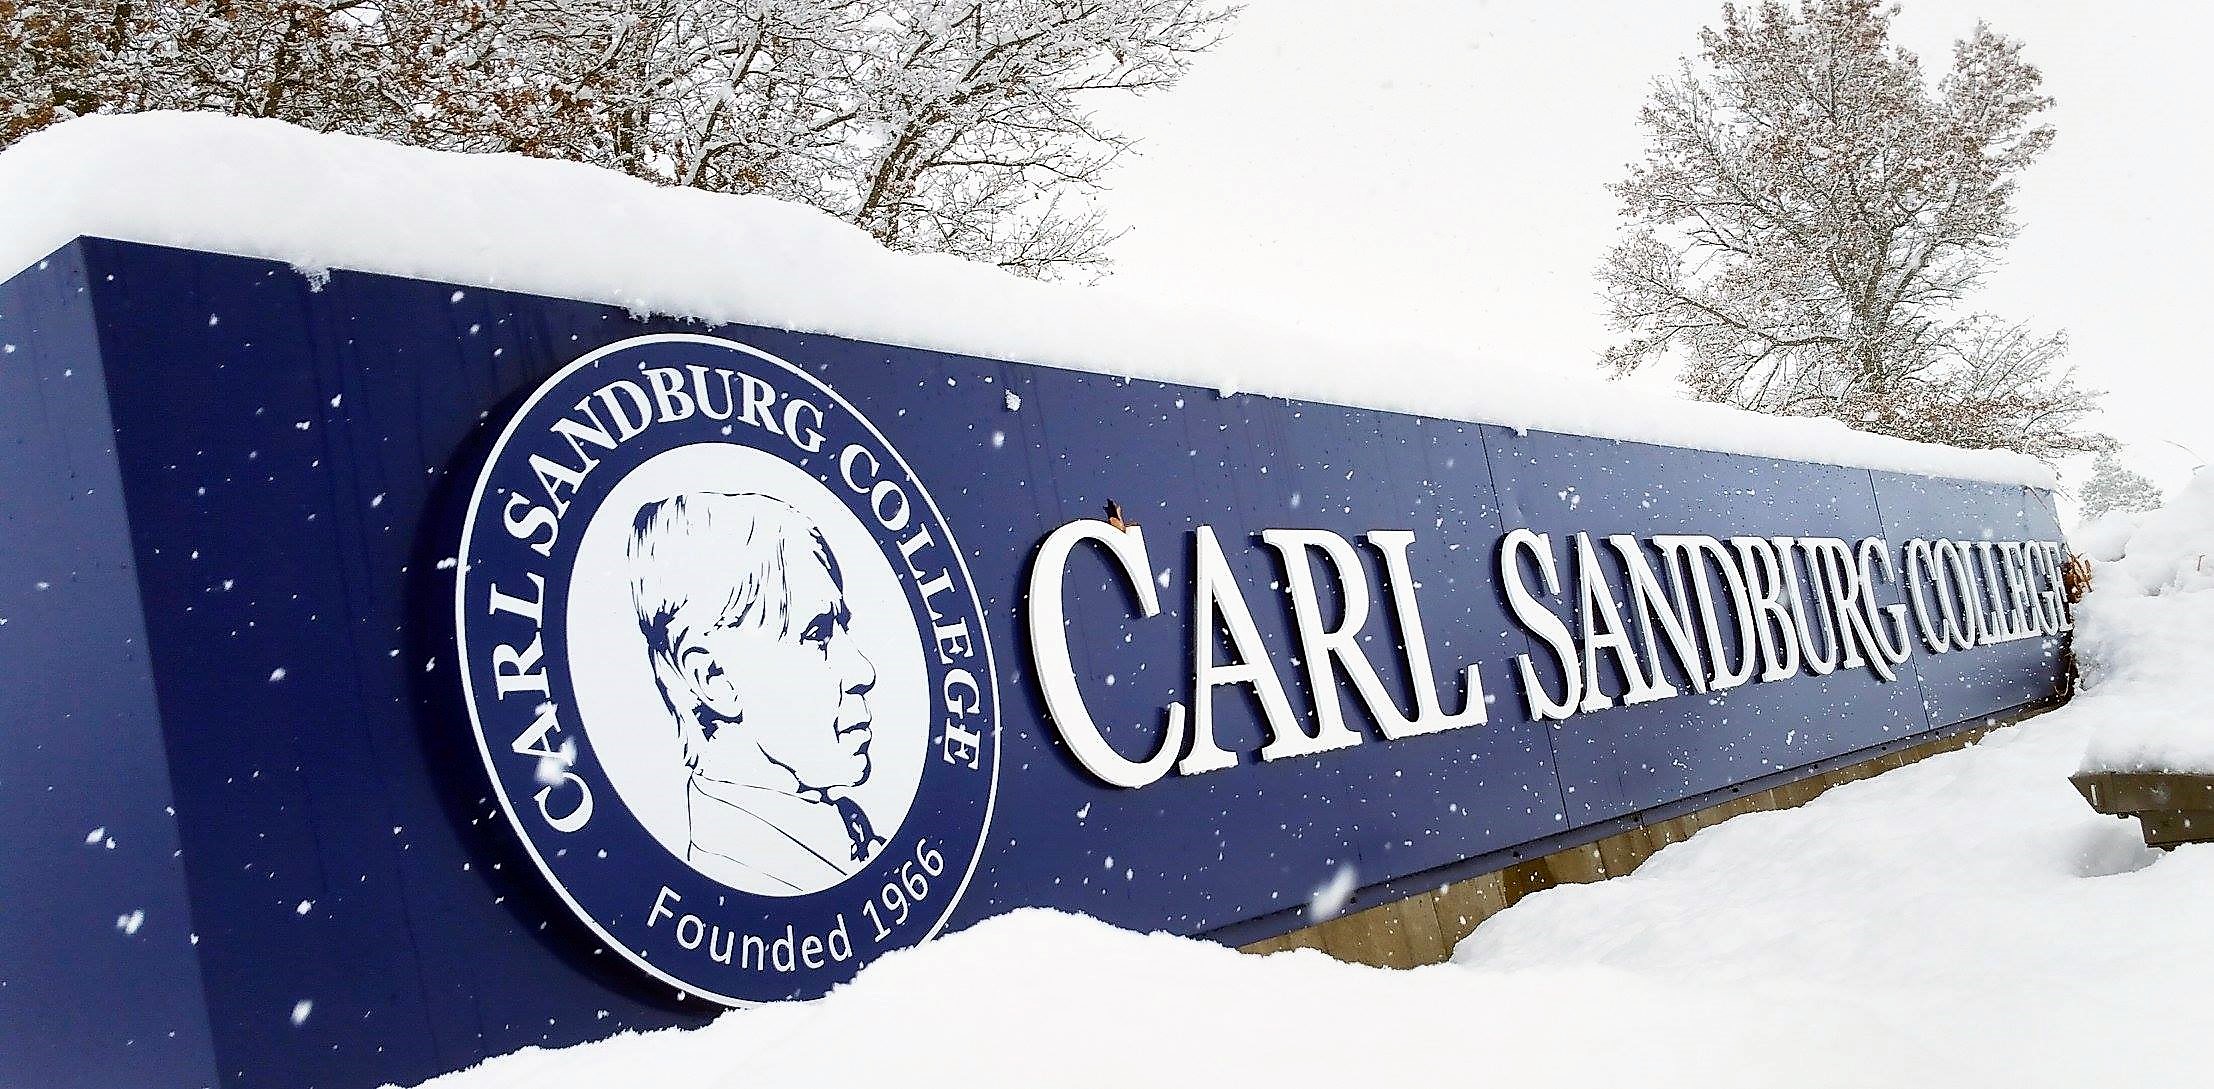 carl sandburg college main campus sign covered in snow.